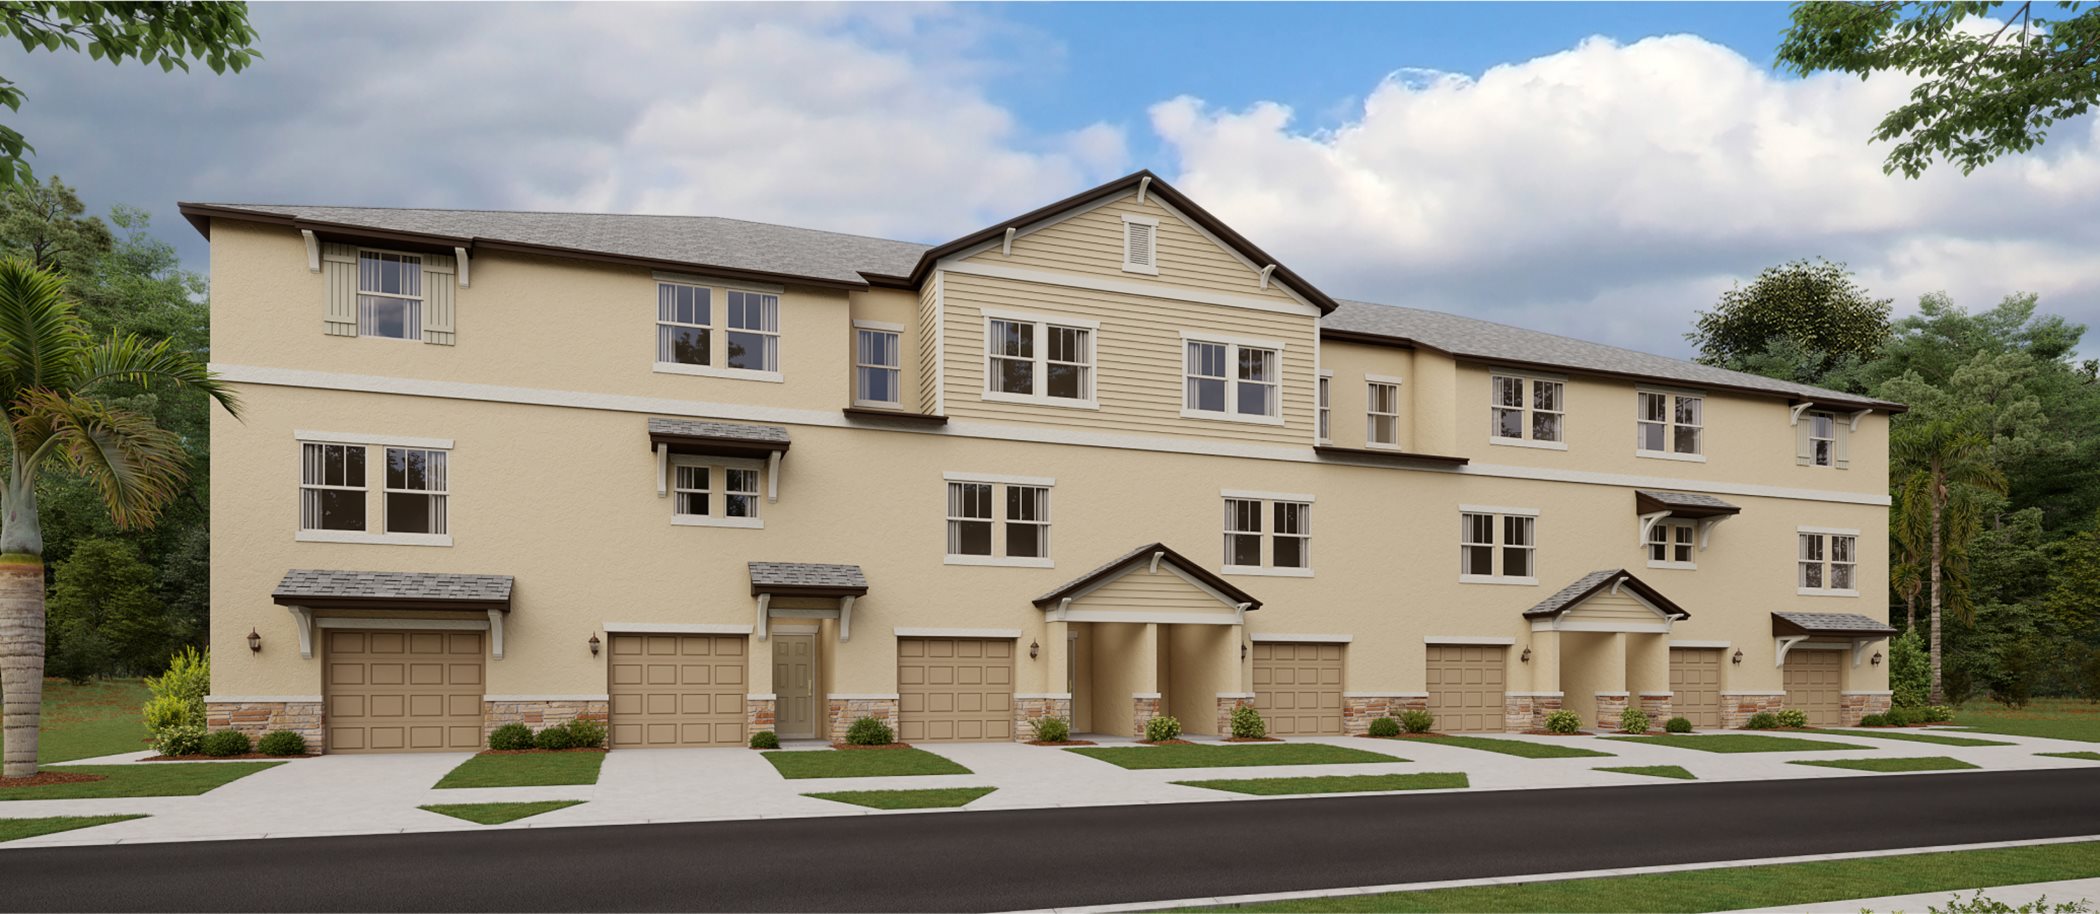 Palm River Townhomes streetscape hero image